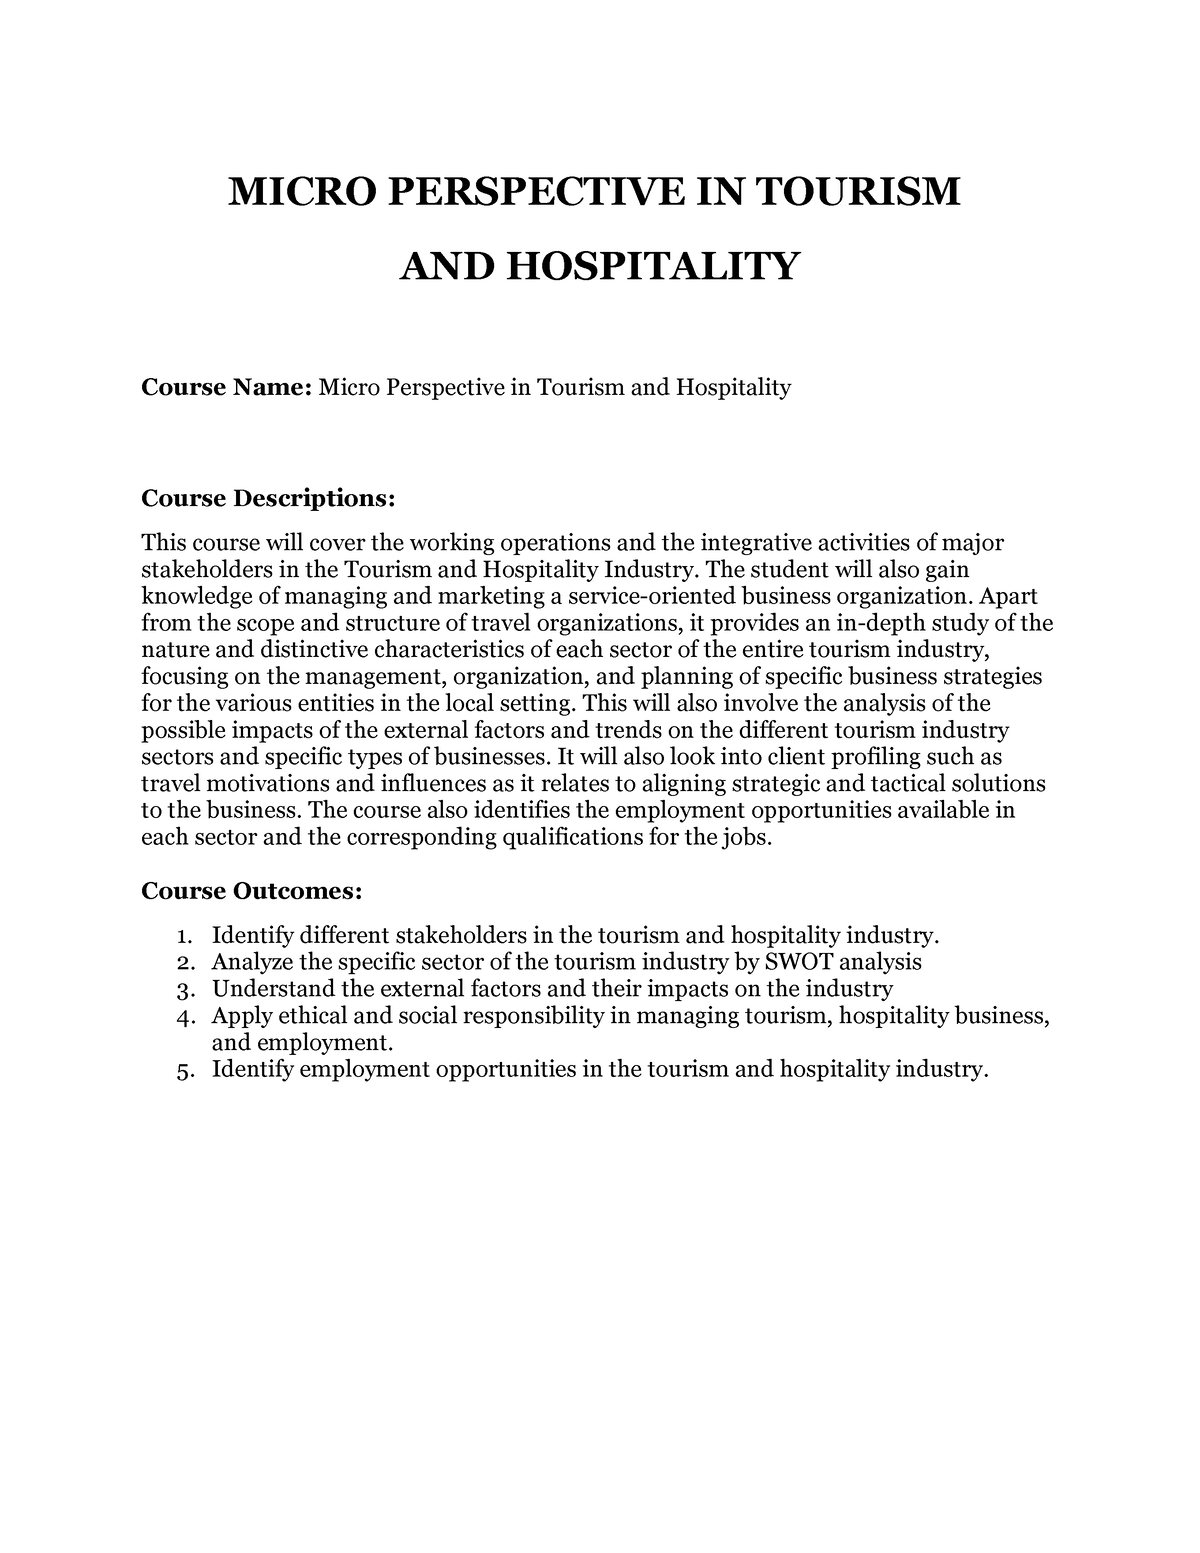 macro perspective of tourism and hospitality essay